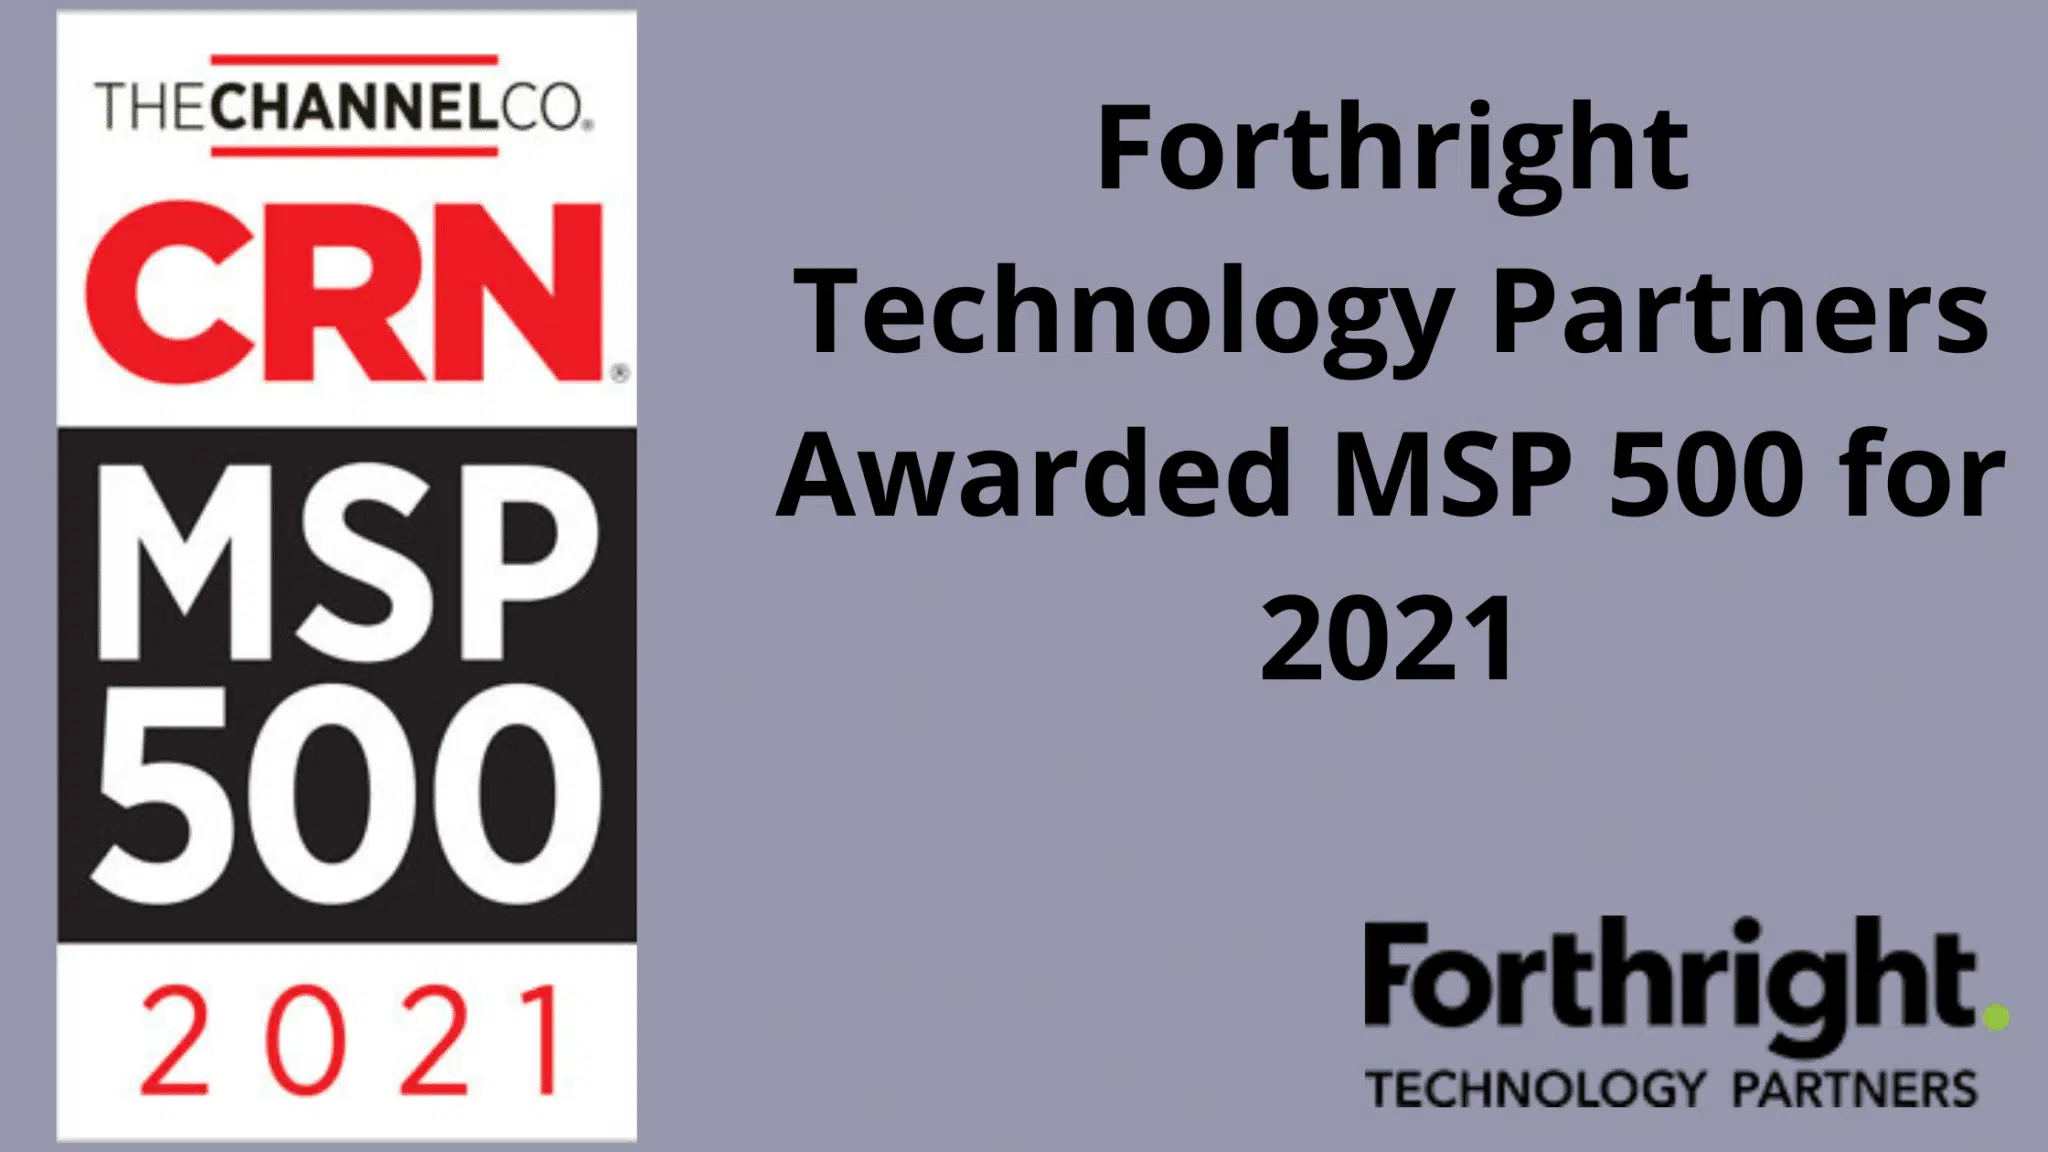 Forthright Technology Partners awarded MSP 500 for 2021